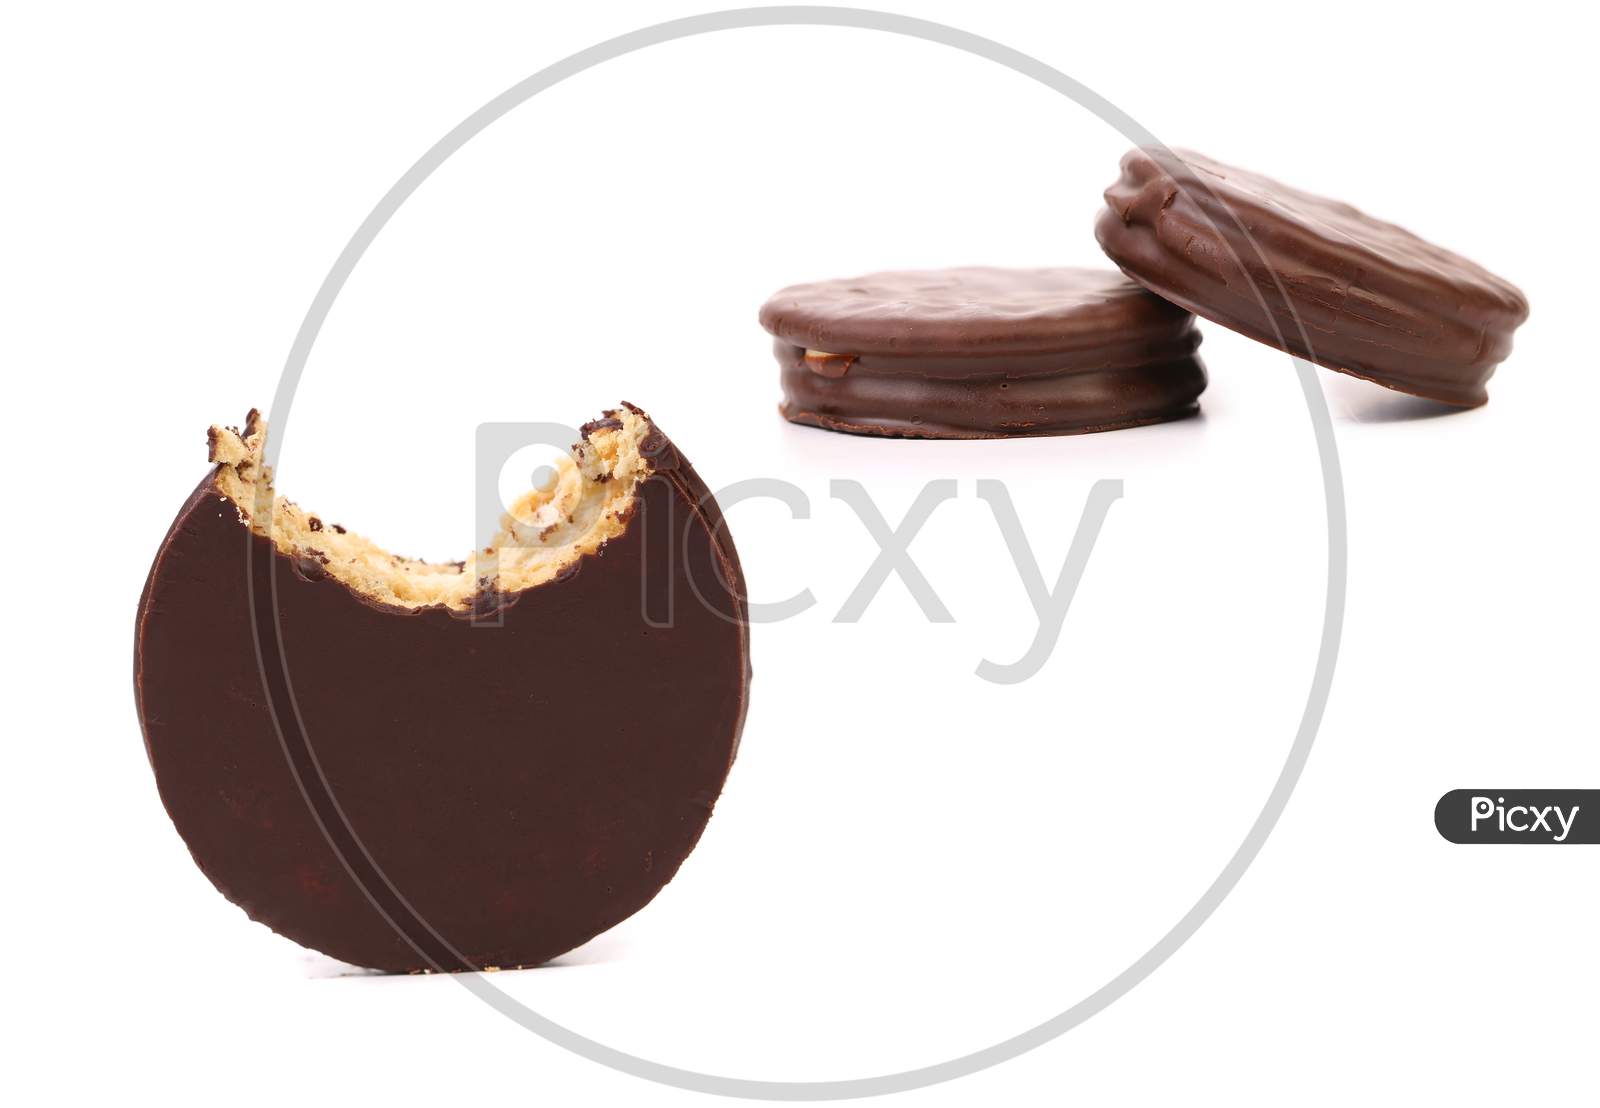 Stack Of Biscuit Sandwich With Chocolate. Isolated On A White Background.